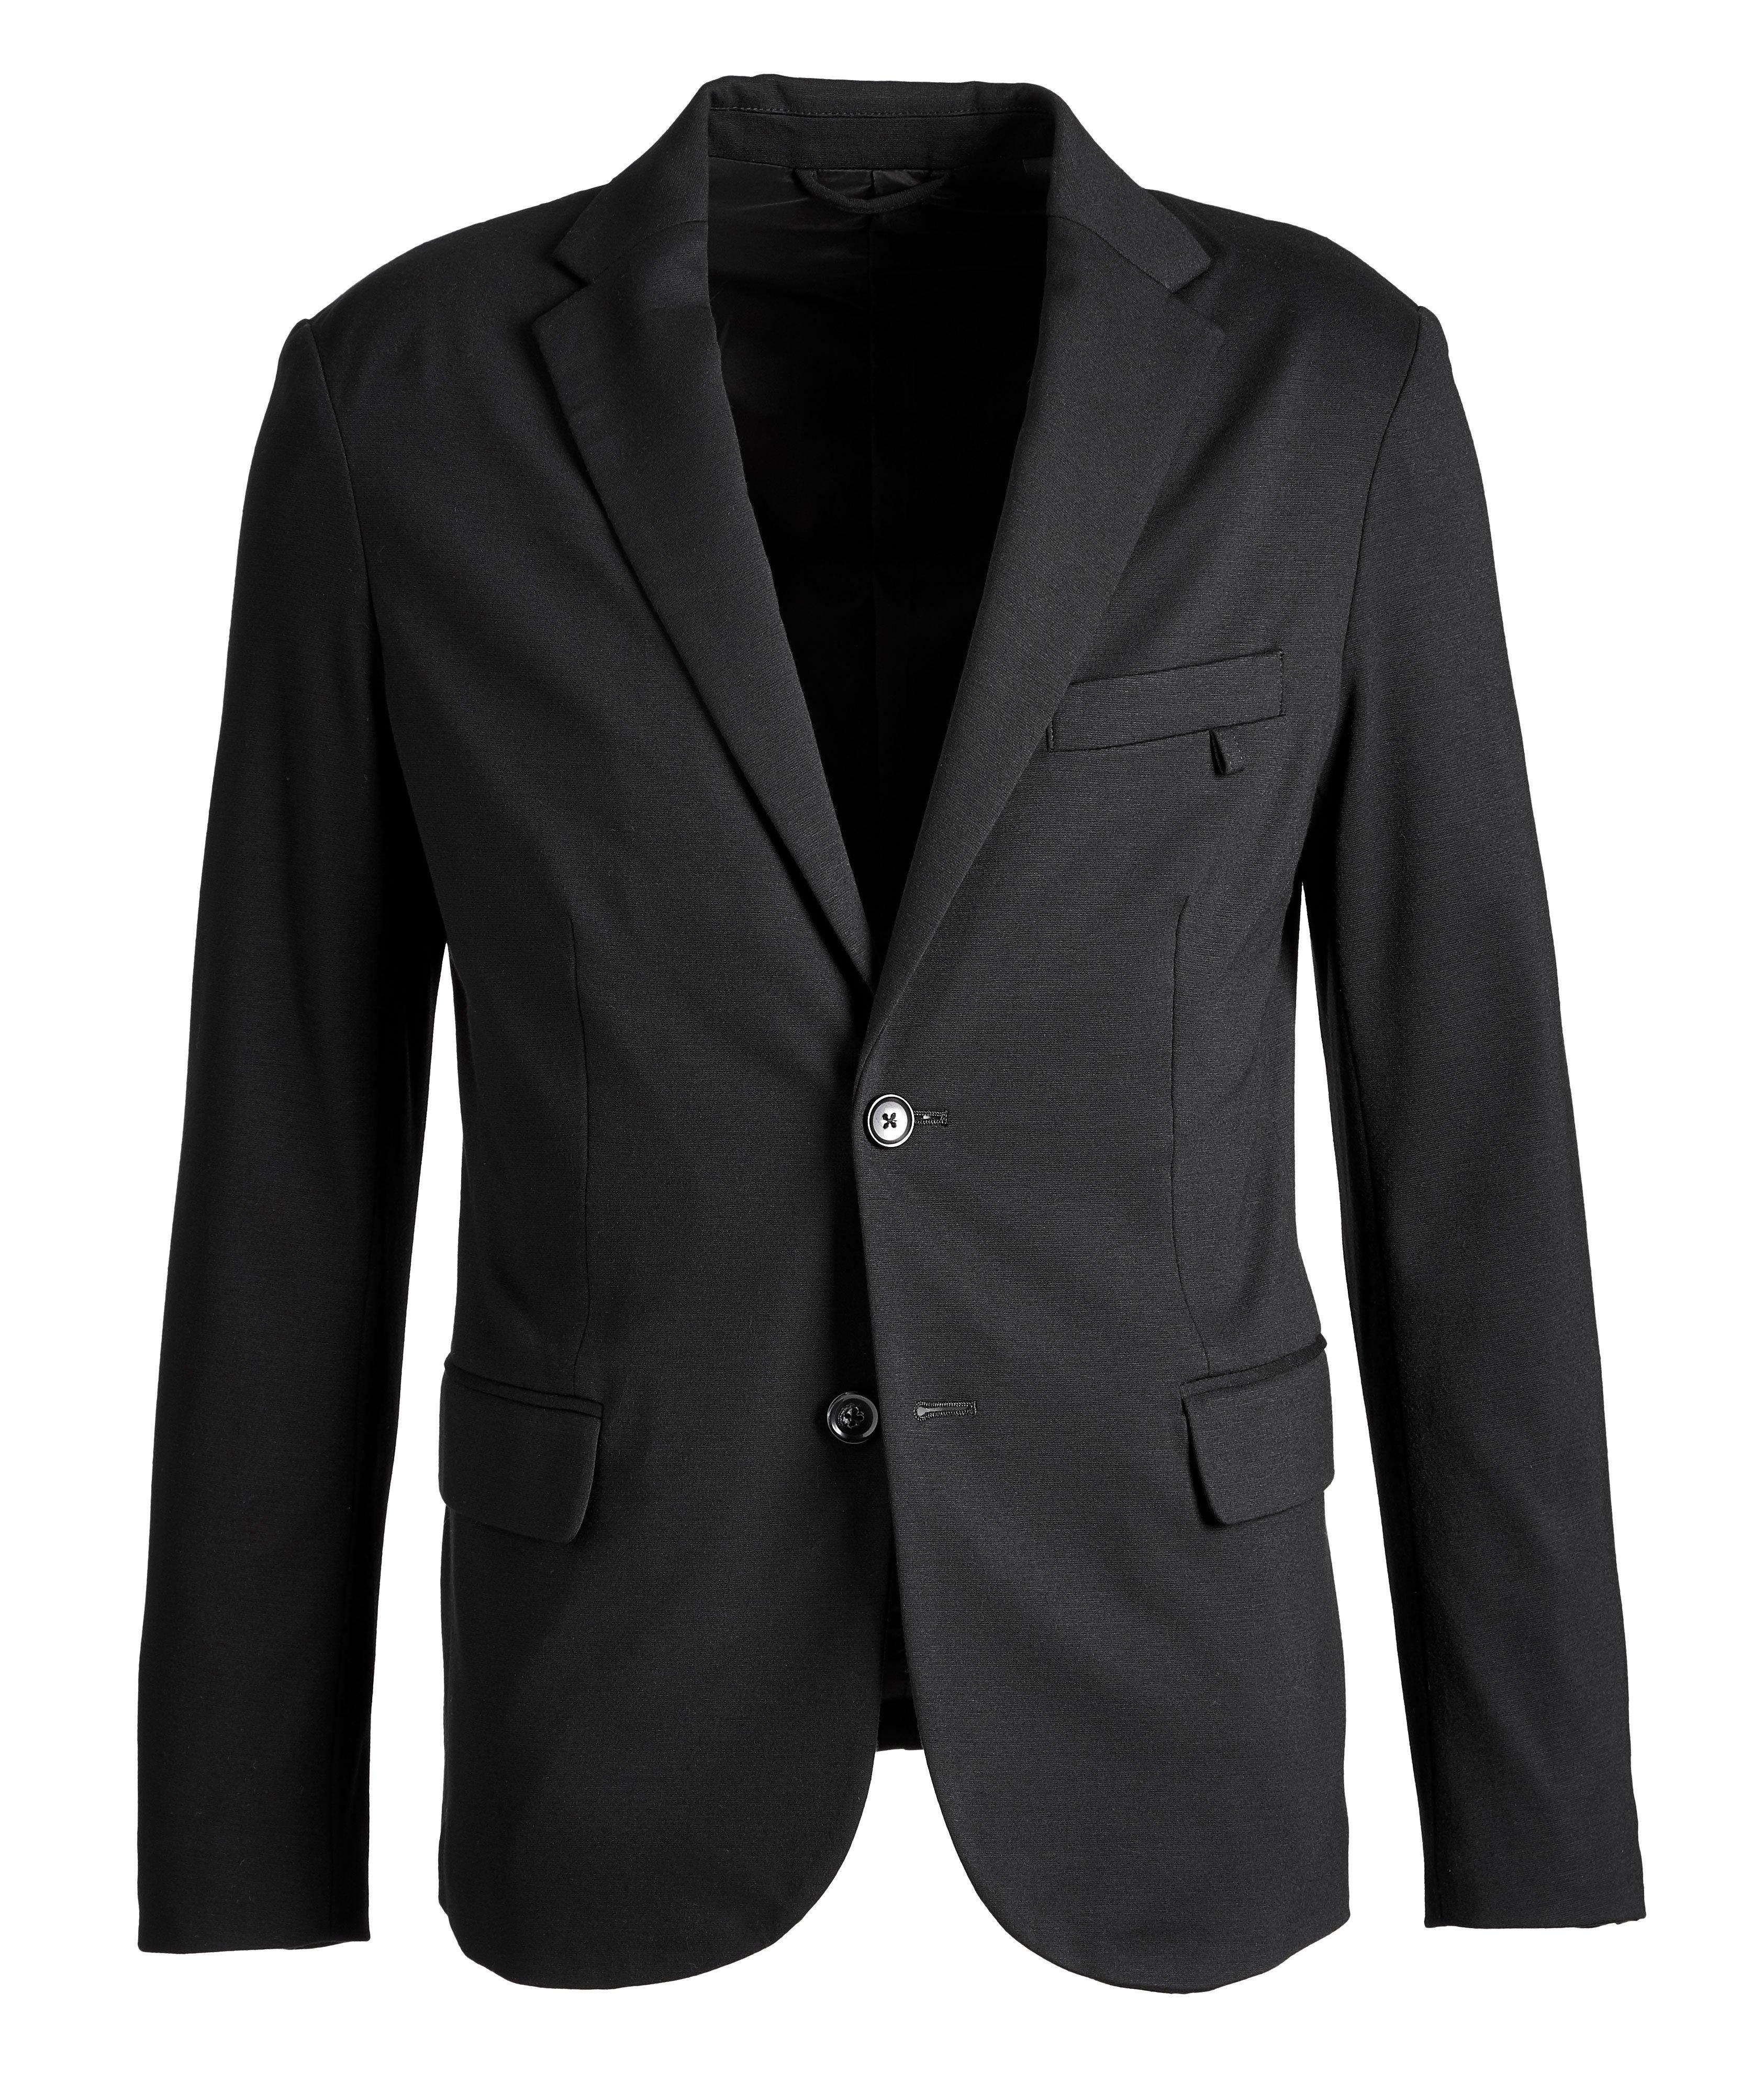 Travel Essential Unstructured Sports Jacket image 0